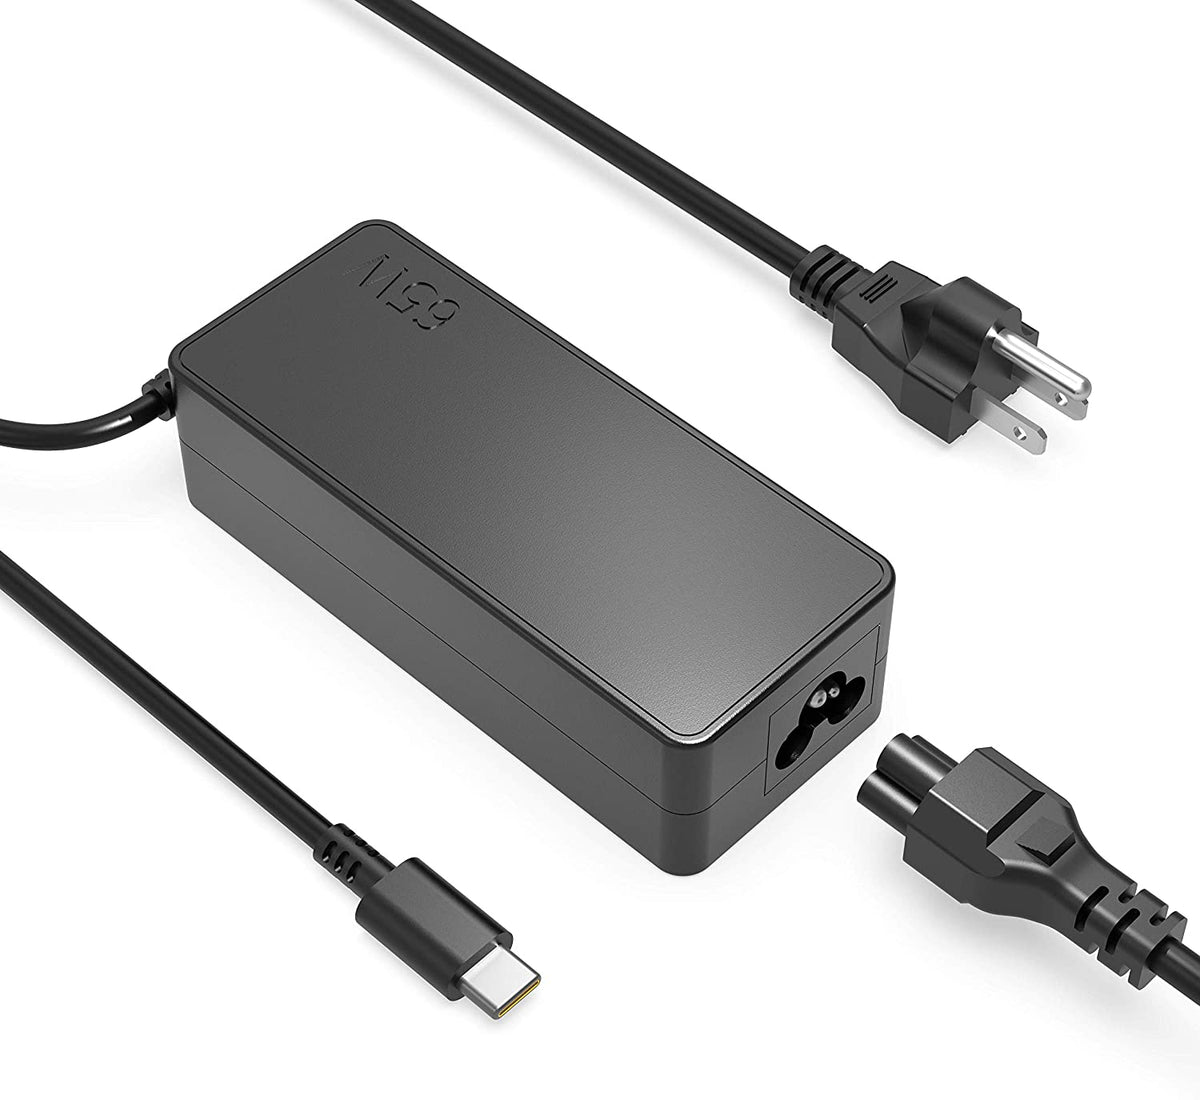 USB-C Laptop Charger for Jumper EZbook X1 Windows Laptop Adapter